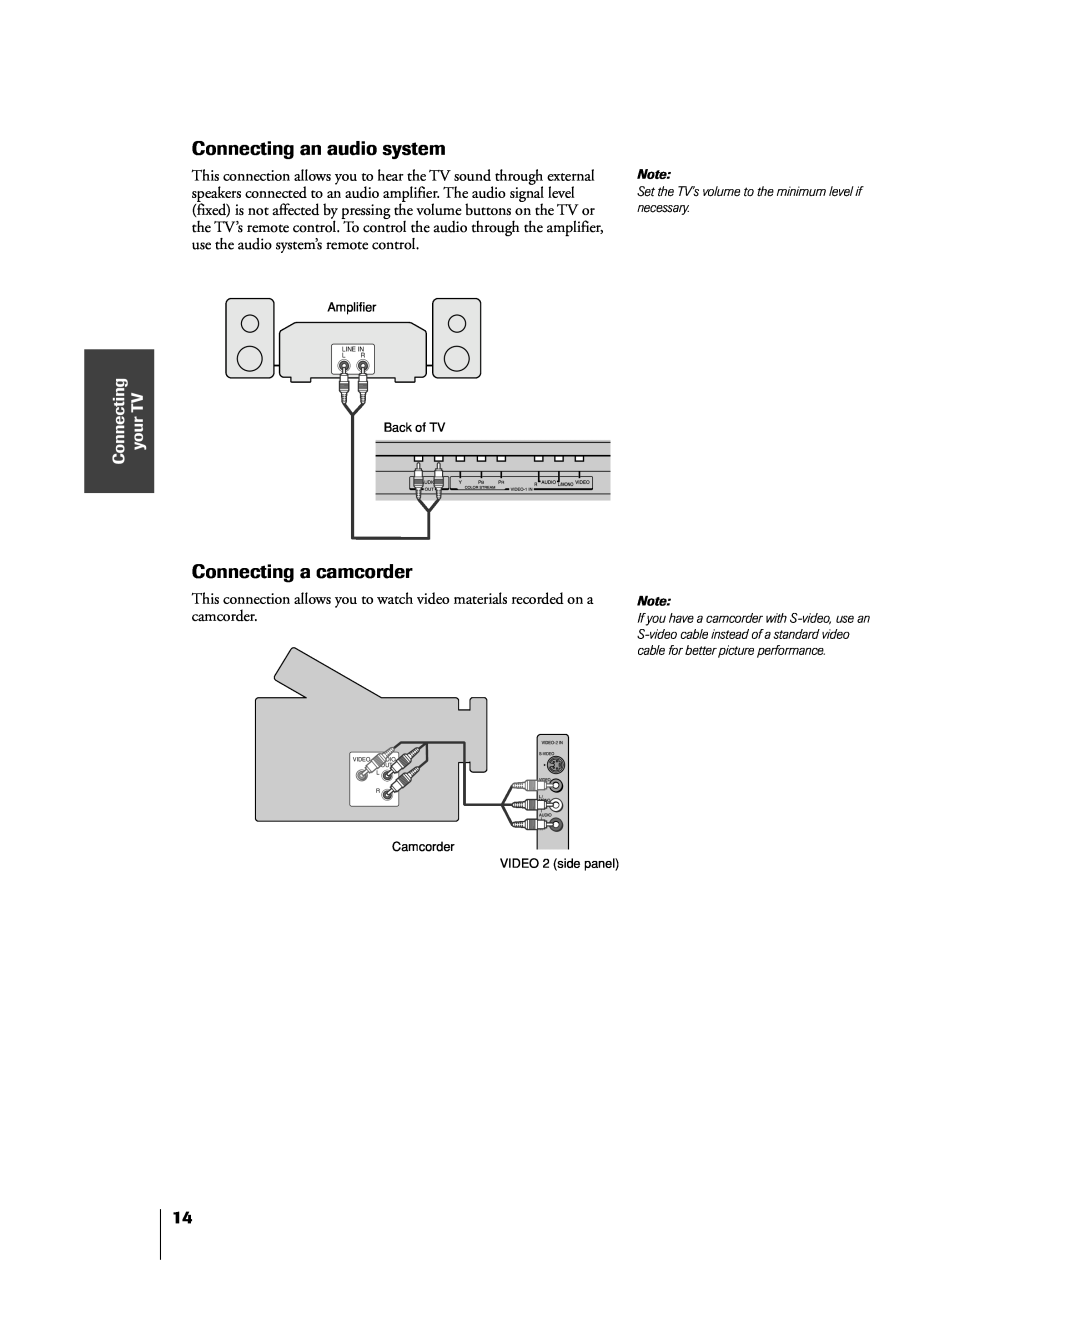 Toshiba 20DL15, 15DL15 owner manual Connecting an audio system, Connecting a camcorder, Connecting your TV 